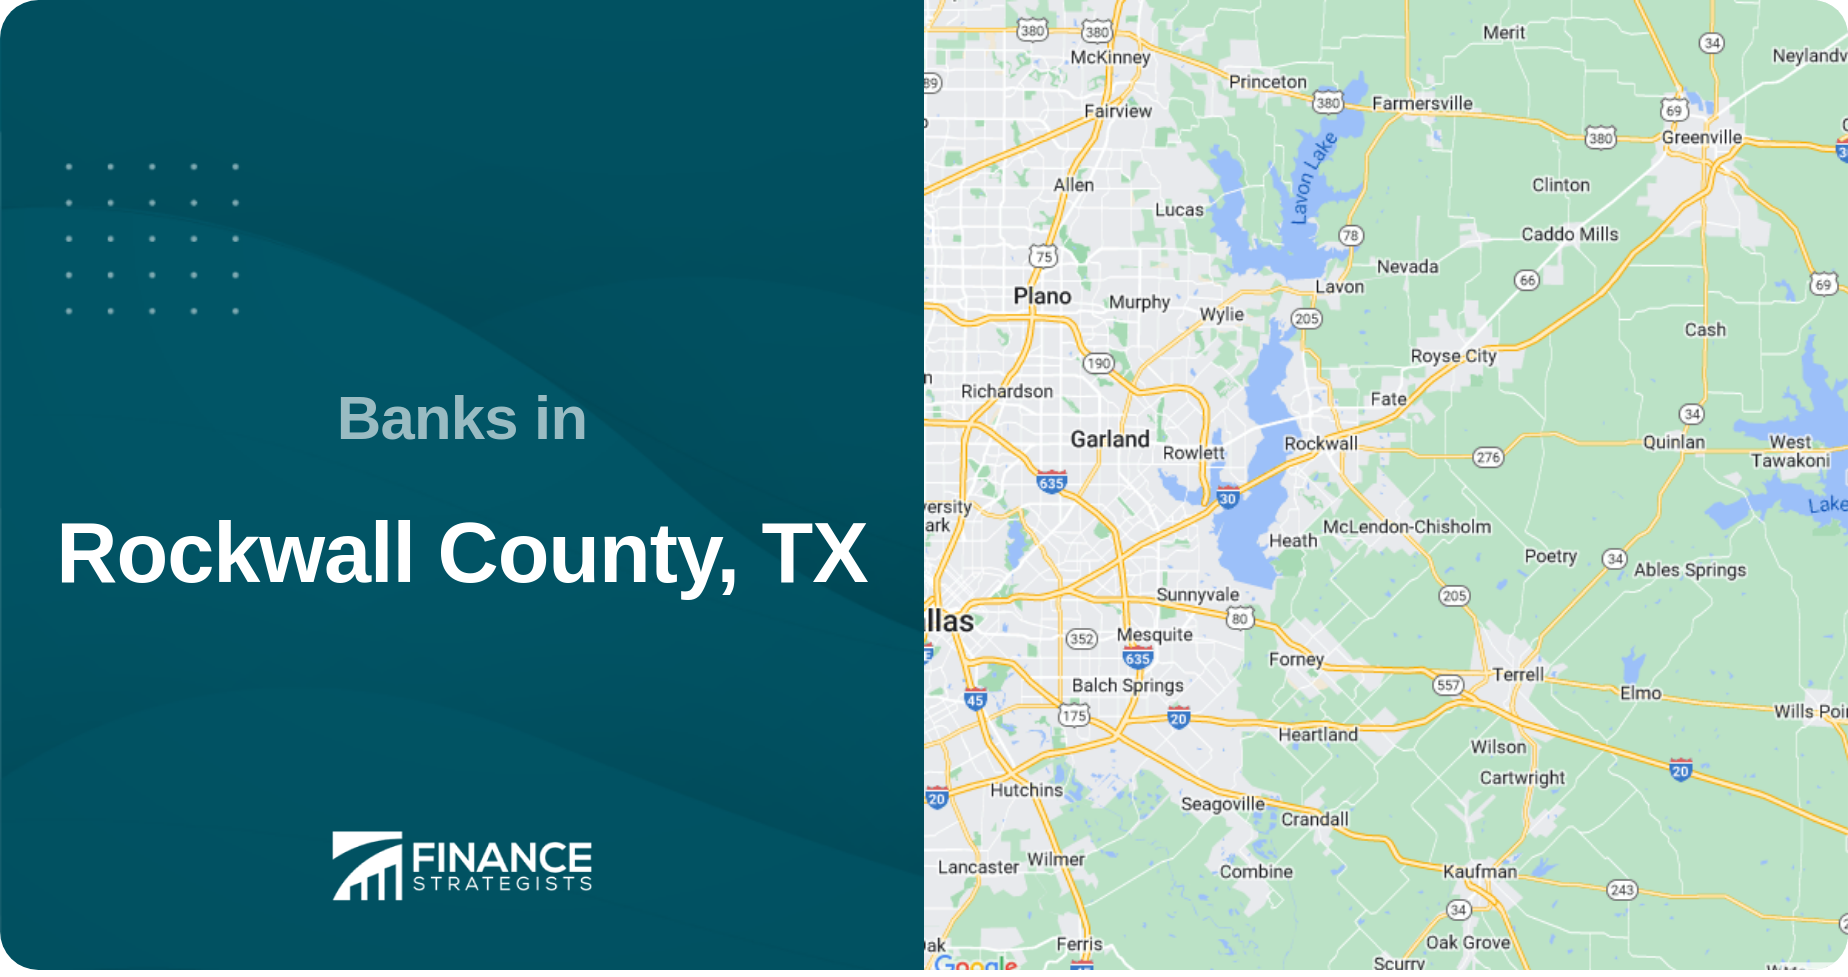 Banks in Rockwall County, TX